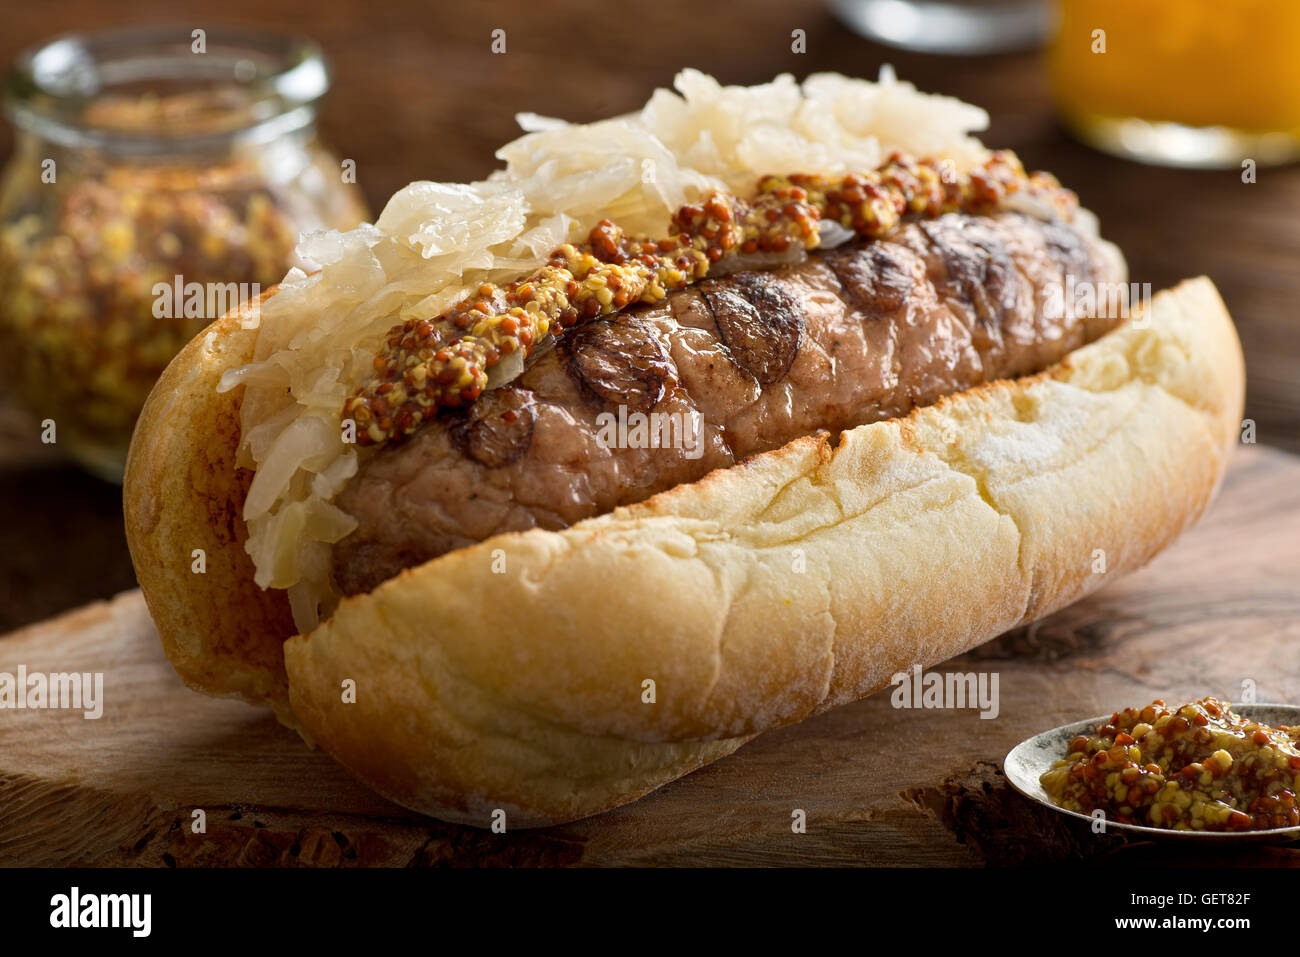 A delicious grilled sausage with sauerkraut and coarse mustard on a toasted hot dog bun. Stock Photo